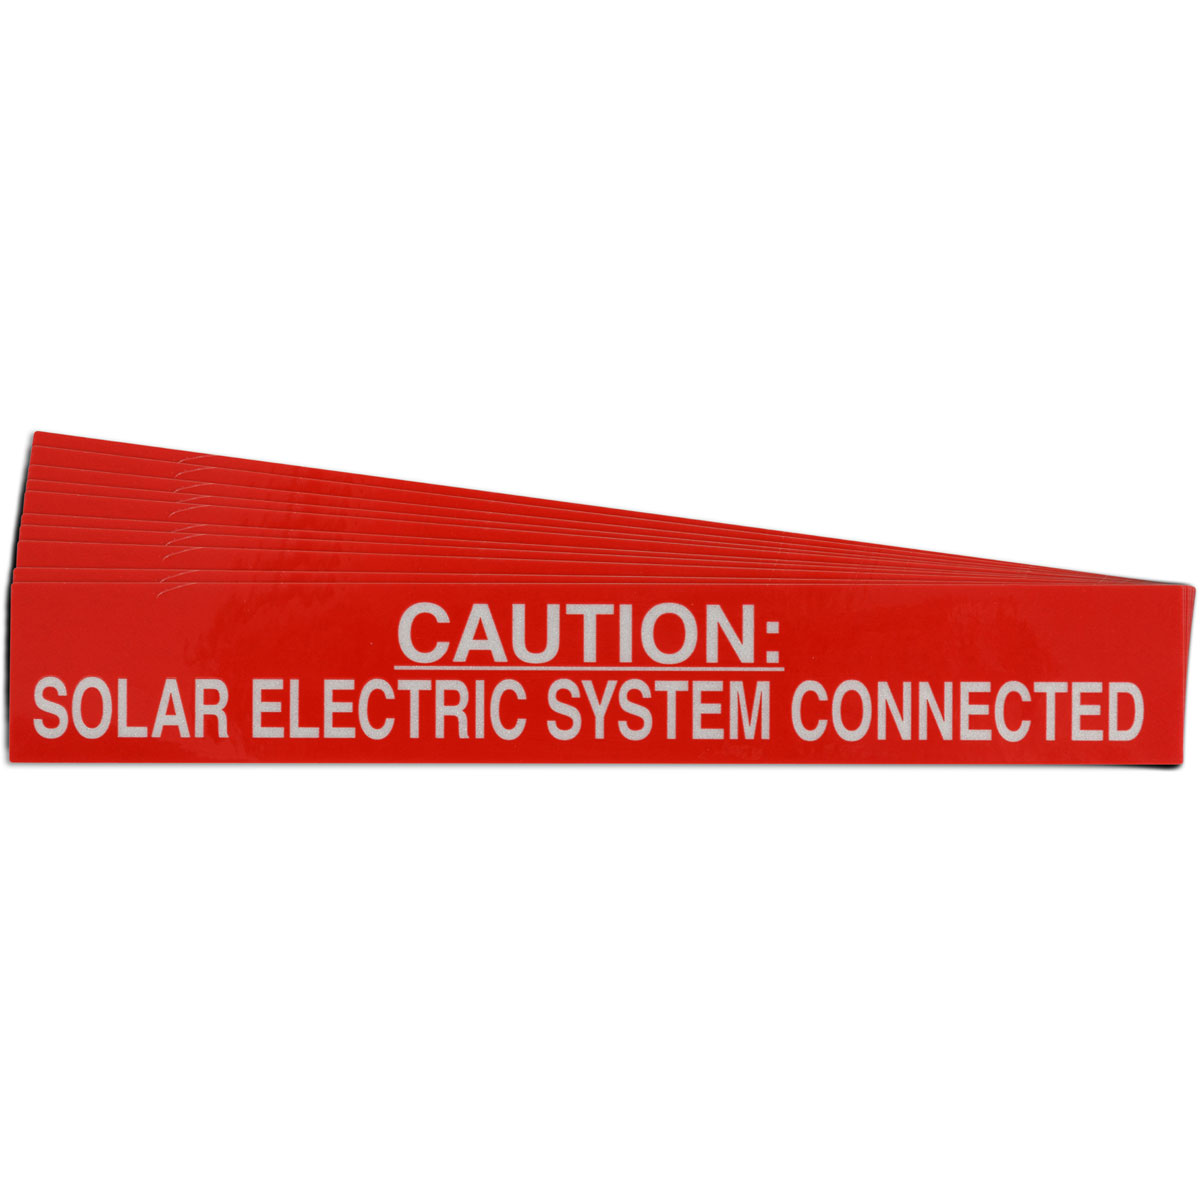 6.5"X1" B921 SOLAR SYSTEM CONNECTED 25PK